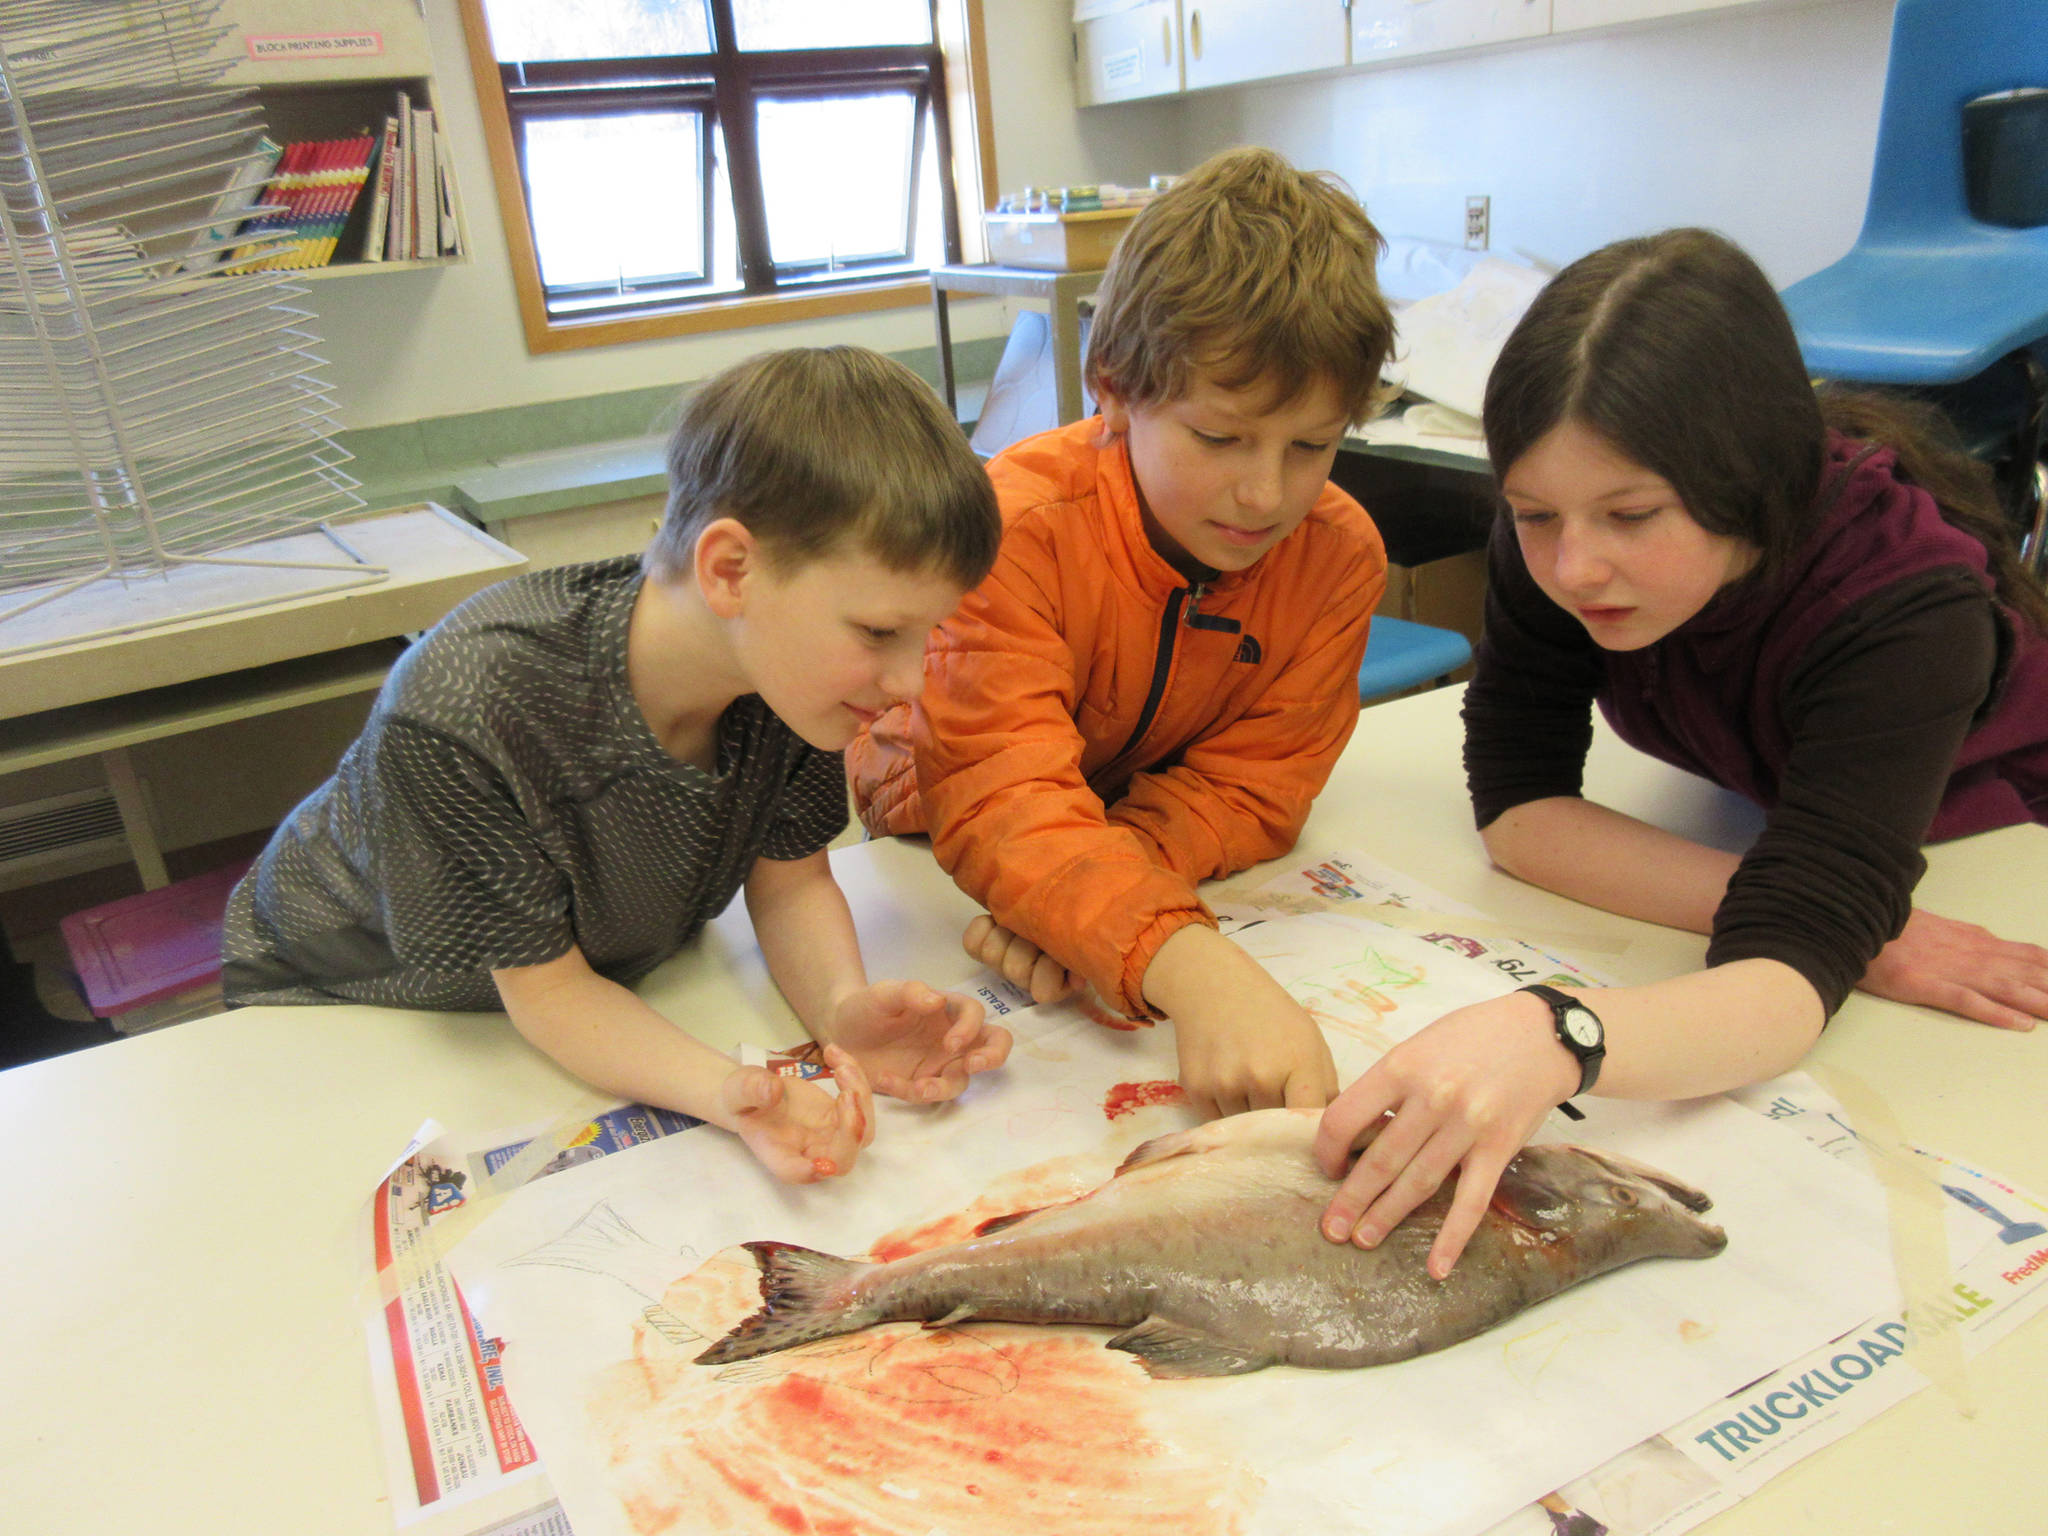 From left to right: Emelian Melkomukov, Rocco Florra and Maggie Mae Gaylord dissect a salmon Thursday, March 1, 2018 at Fireweed Academy in Homer, Alaska. (Photo by Fireweed Academy Principal Todd Hindman)